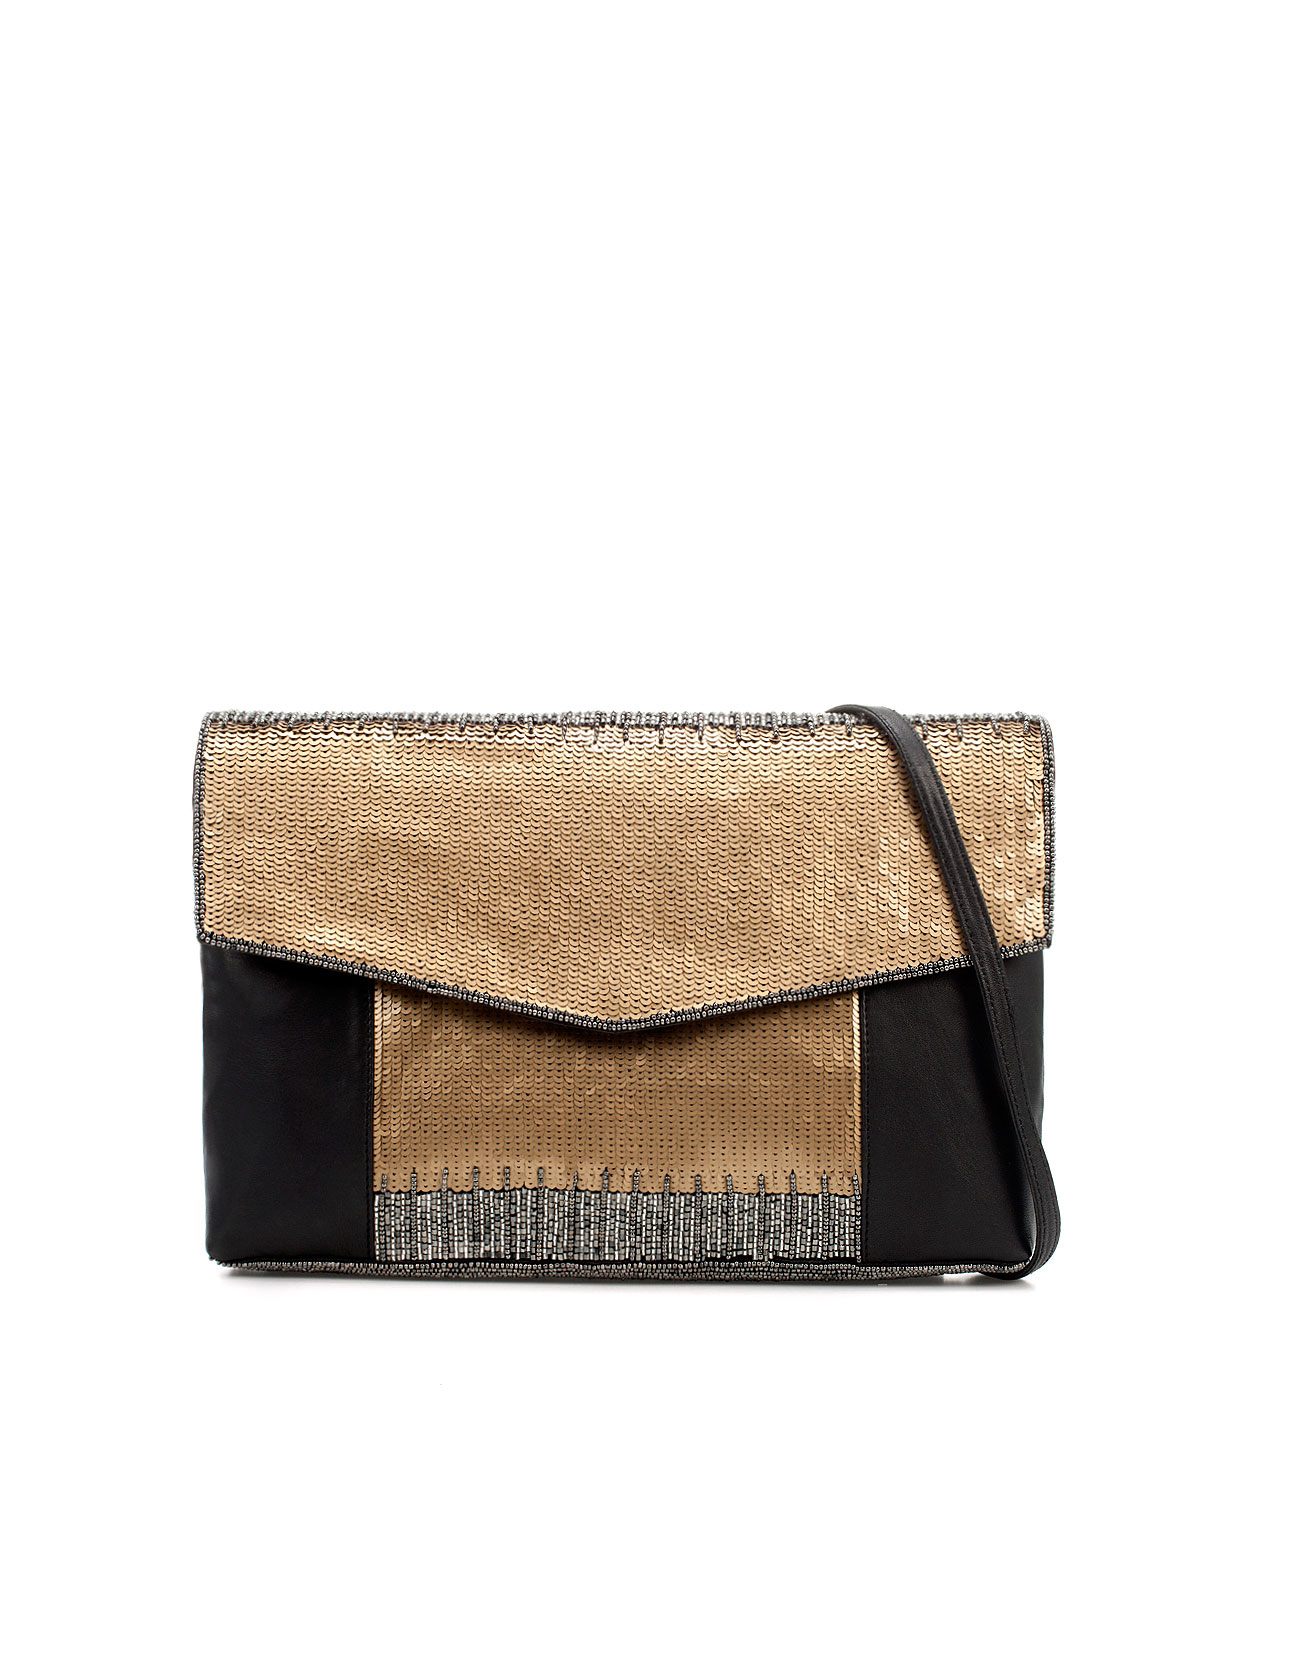 Zara Embroidered Leather Clutch Bag in Brown (black) | Lyst